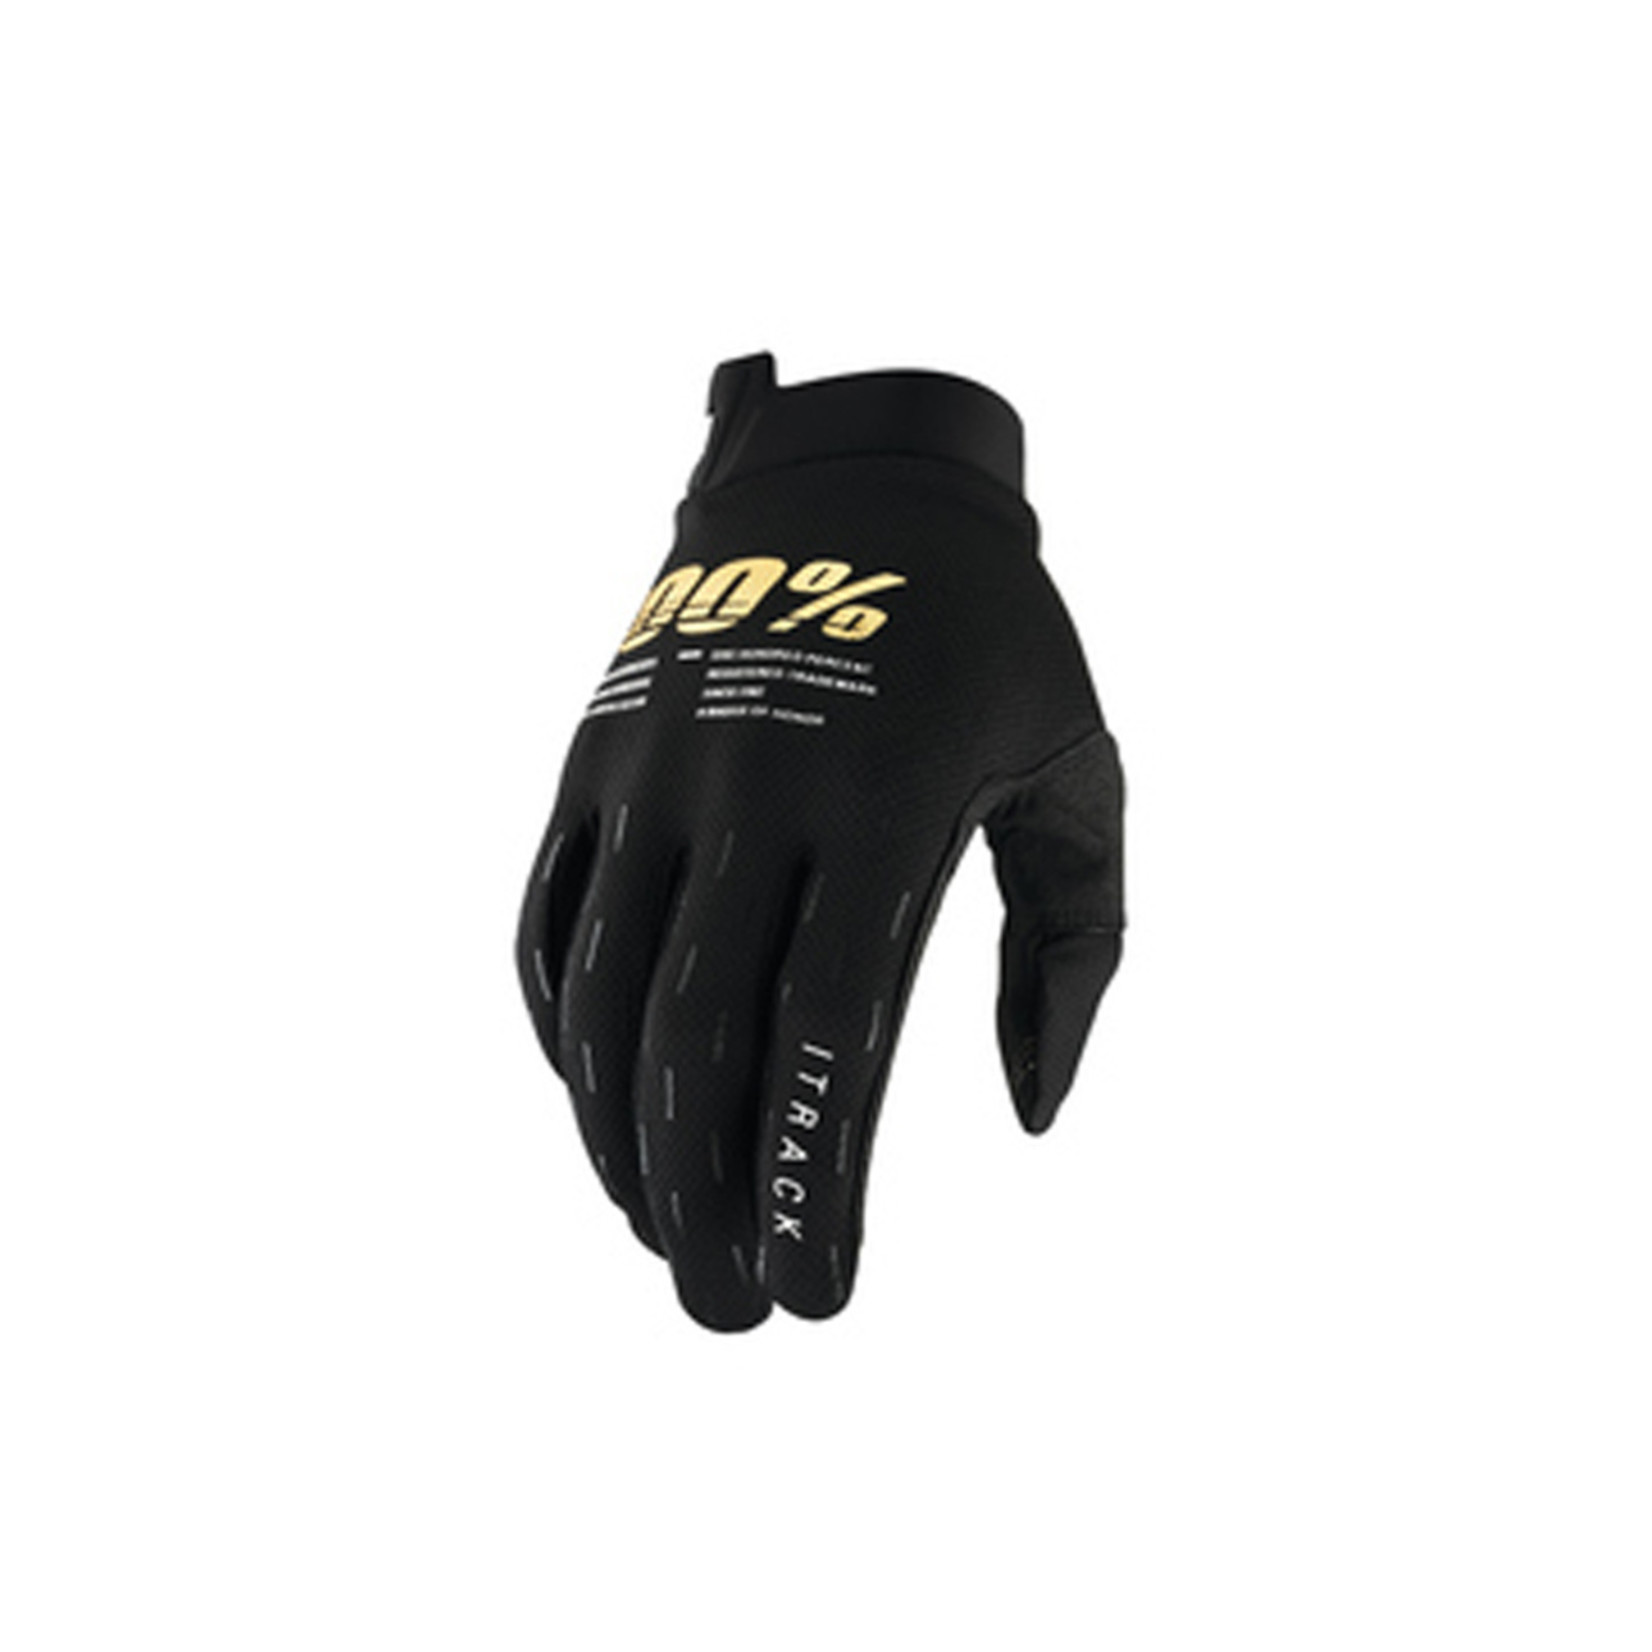 100 Percent 100% Itrack Youth Cycling Glove - Black